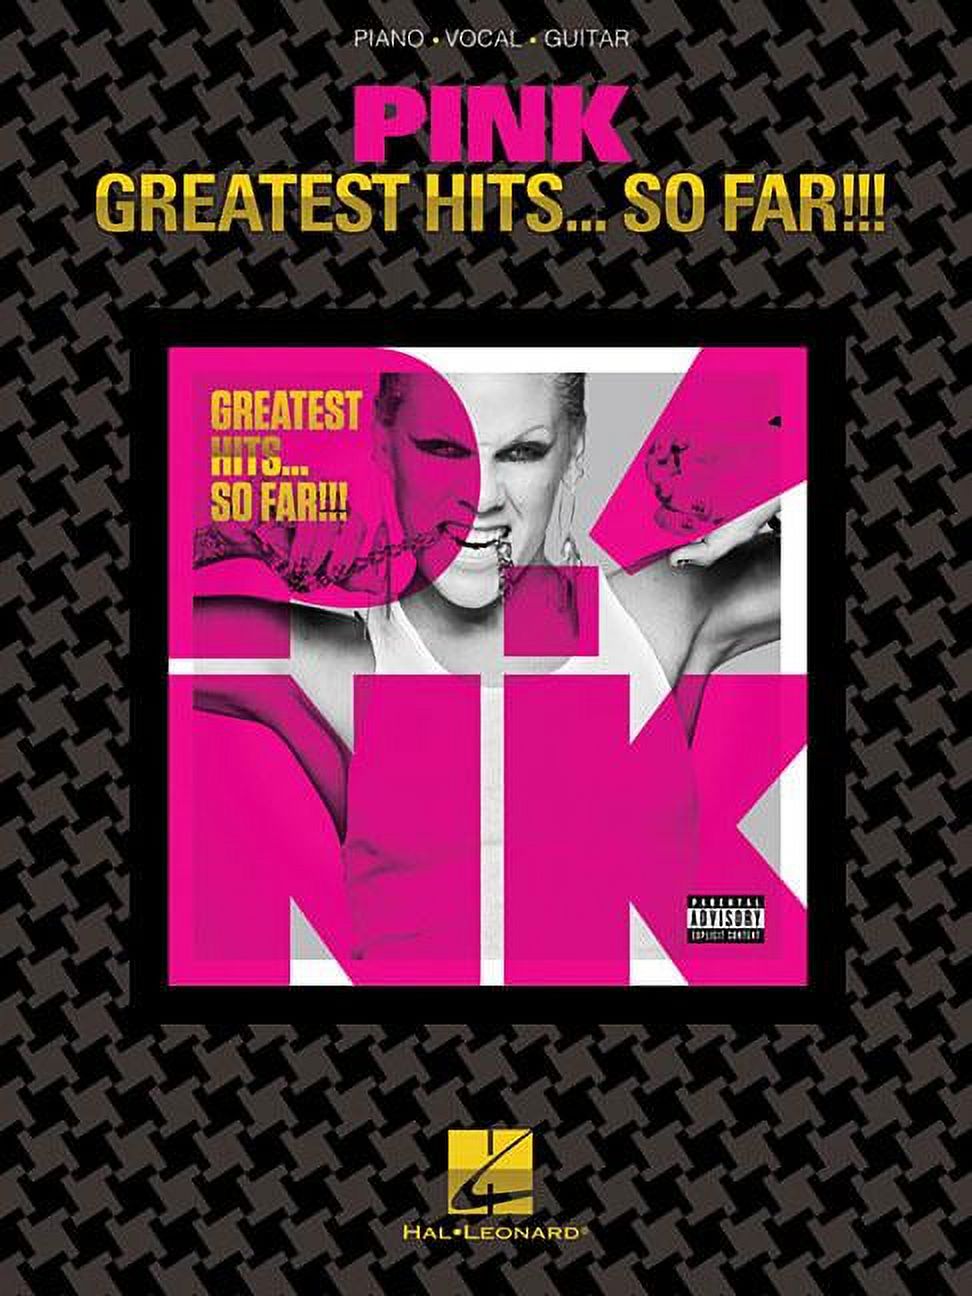 Pink: Greatest Hits... So Far!!! (Paperback) - image 1 of 1